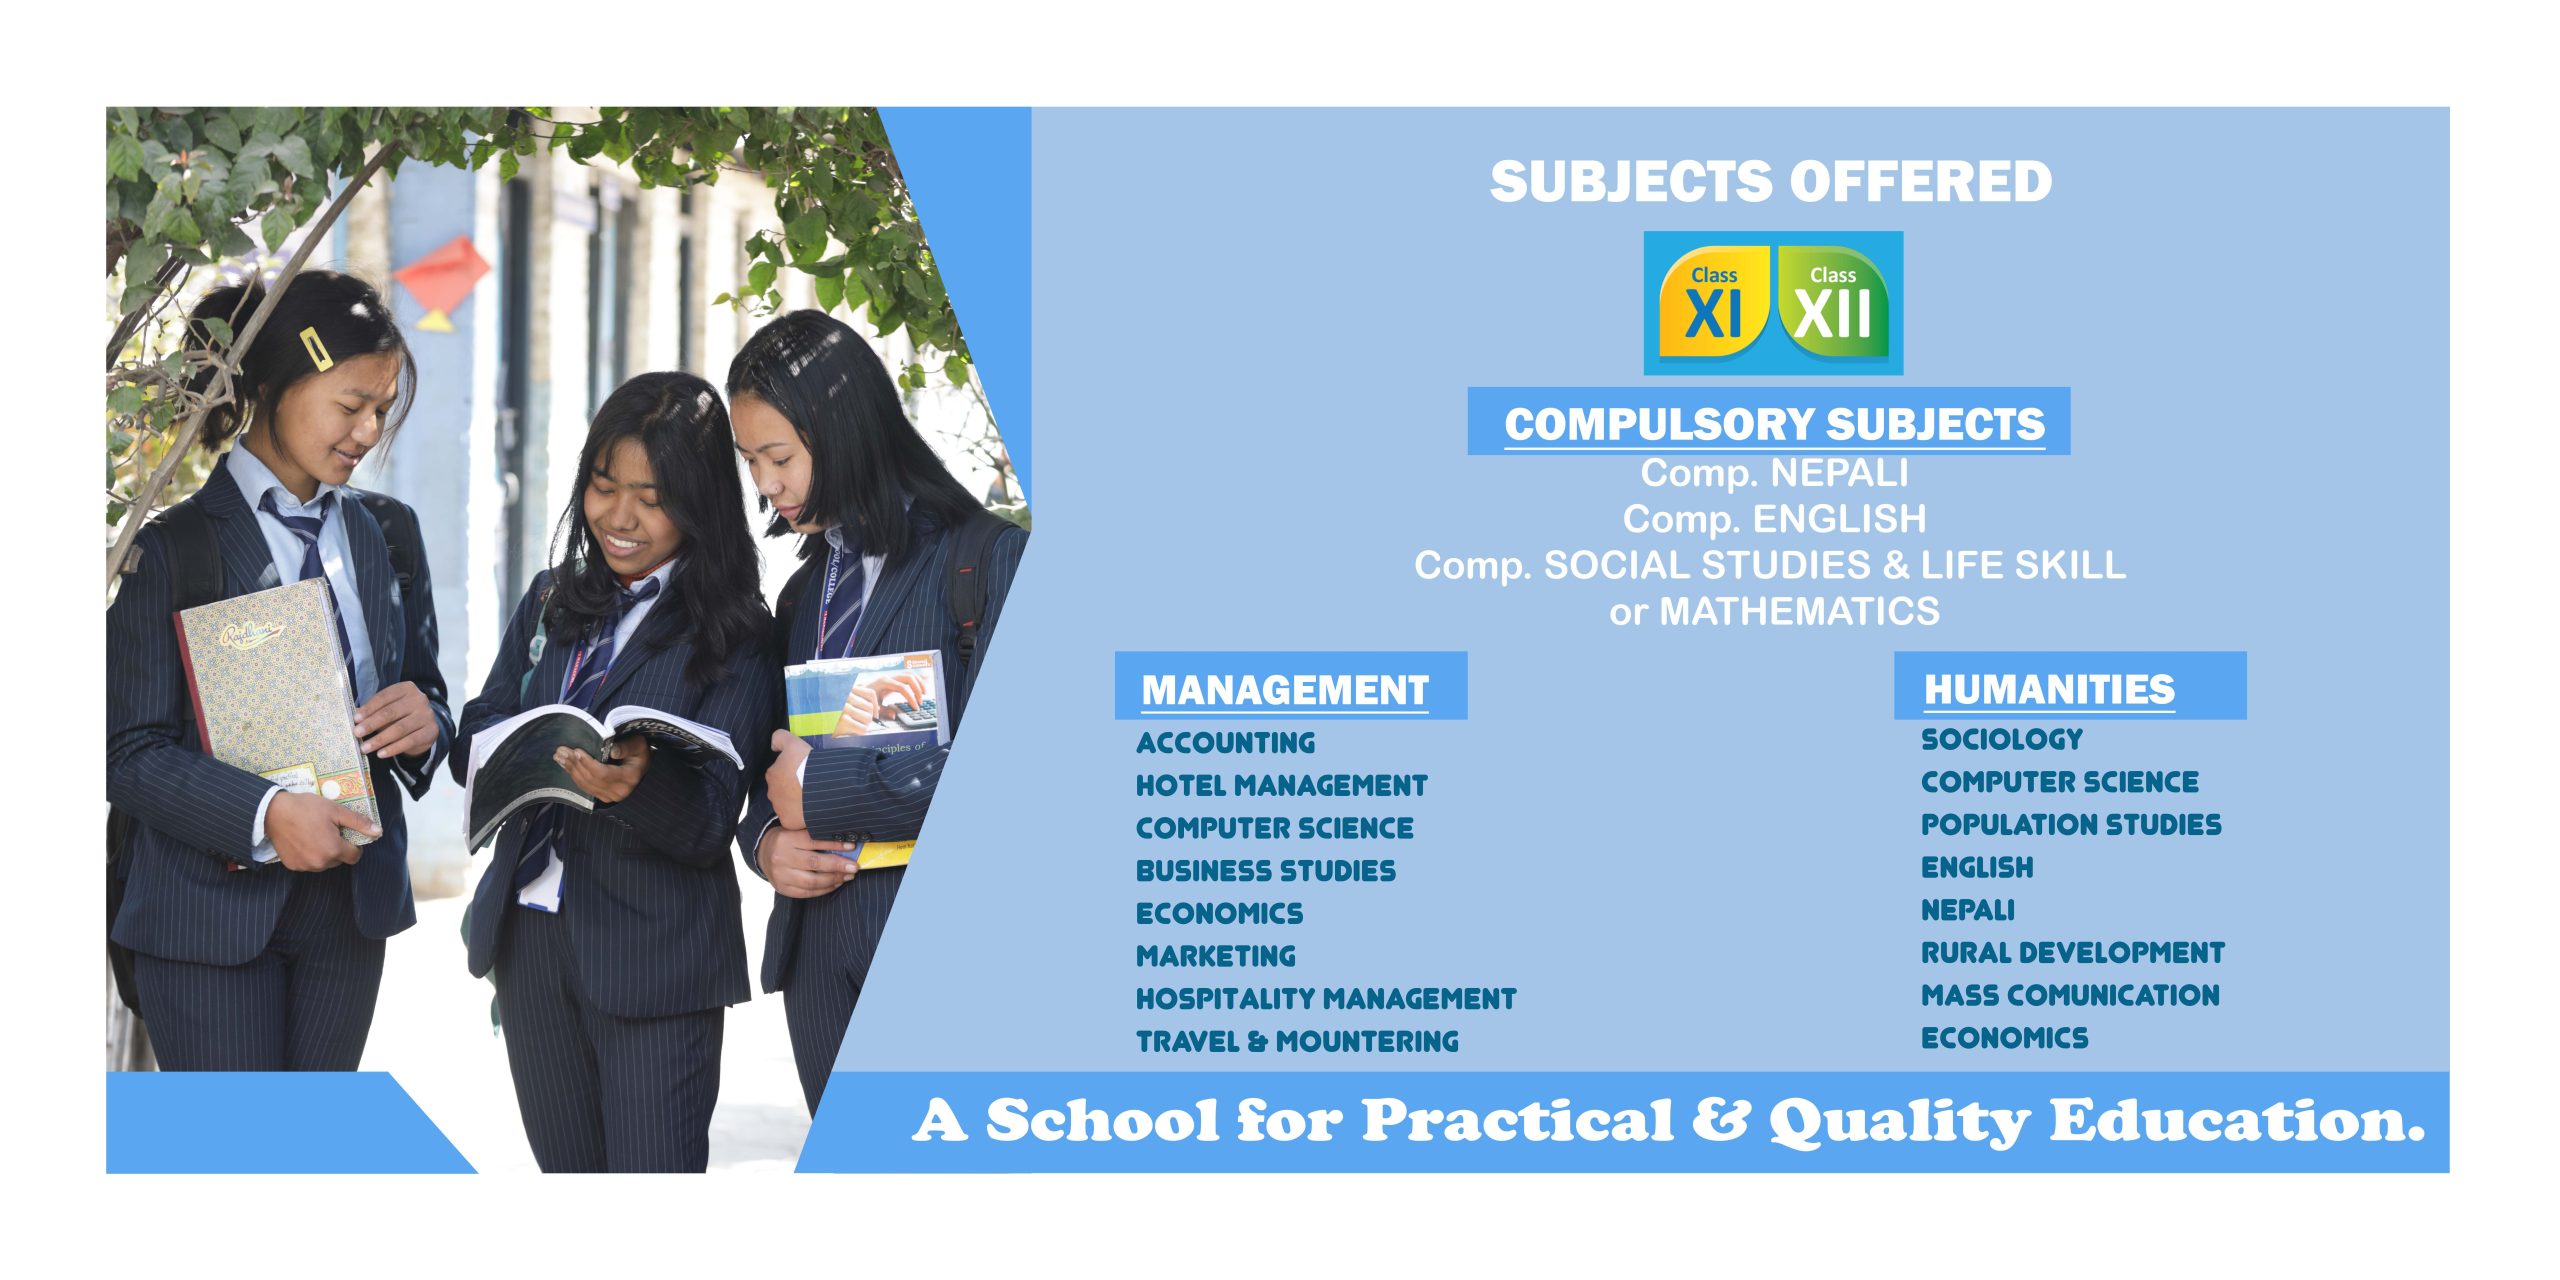 Subject offered in Oxford School / college in +2 program ( Management and Humanities ) Computer Science, Marketing, Business Studies, marketing, accounting, economics, Hotel Management, hospitality management, sociology, mass communication, english, nepali, Travel and Mountaineering , Population studies